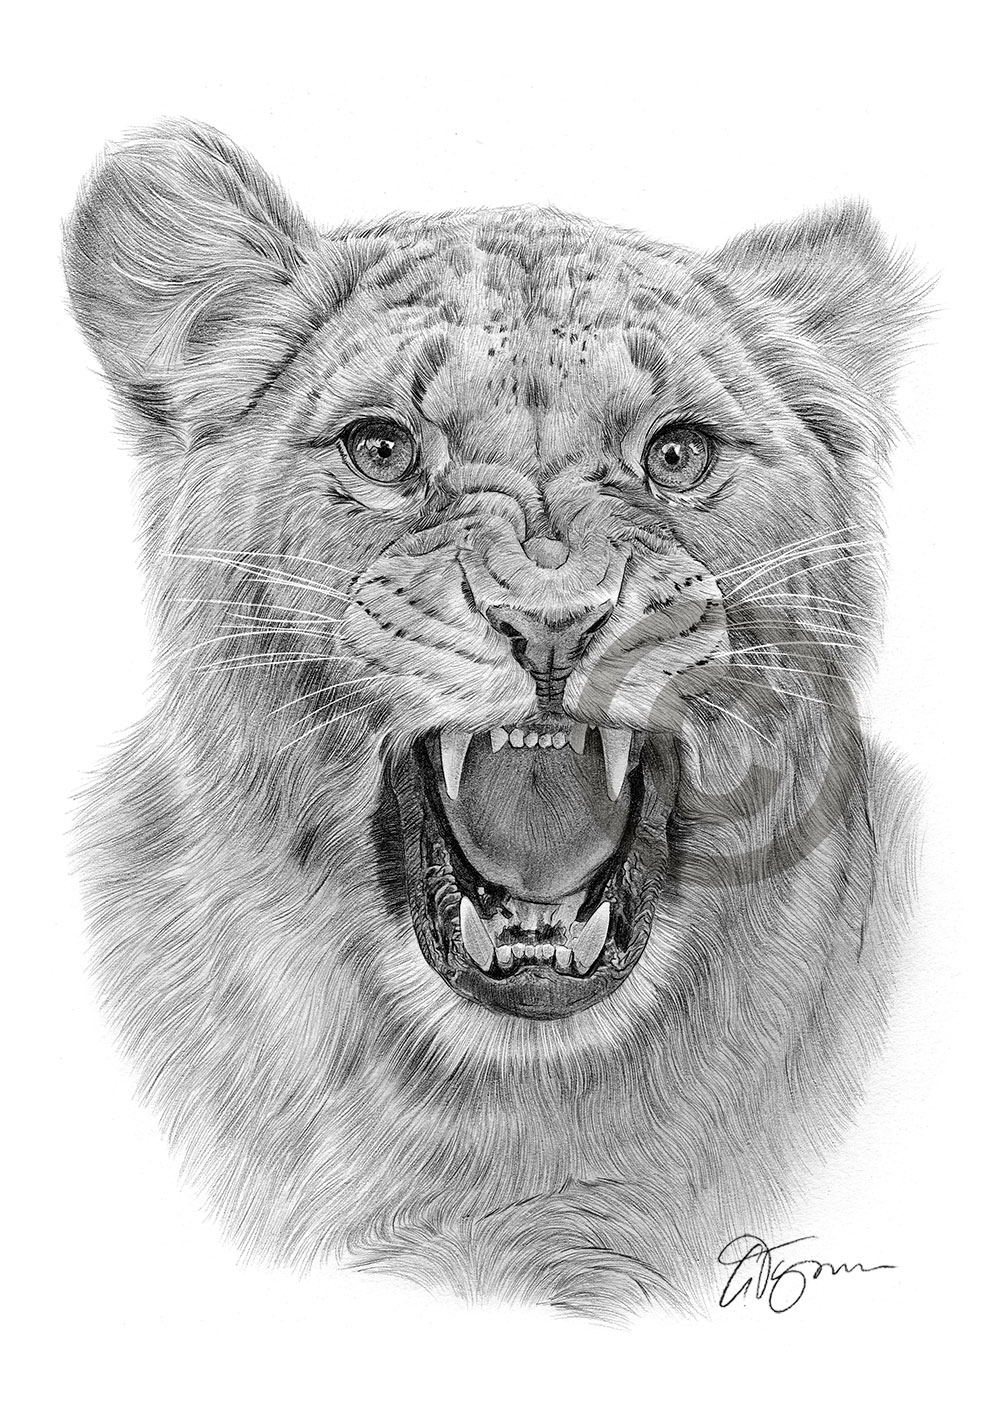 Pencil drawing of an angry lioness by artist Gary Tymon